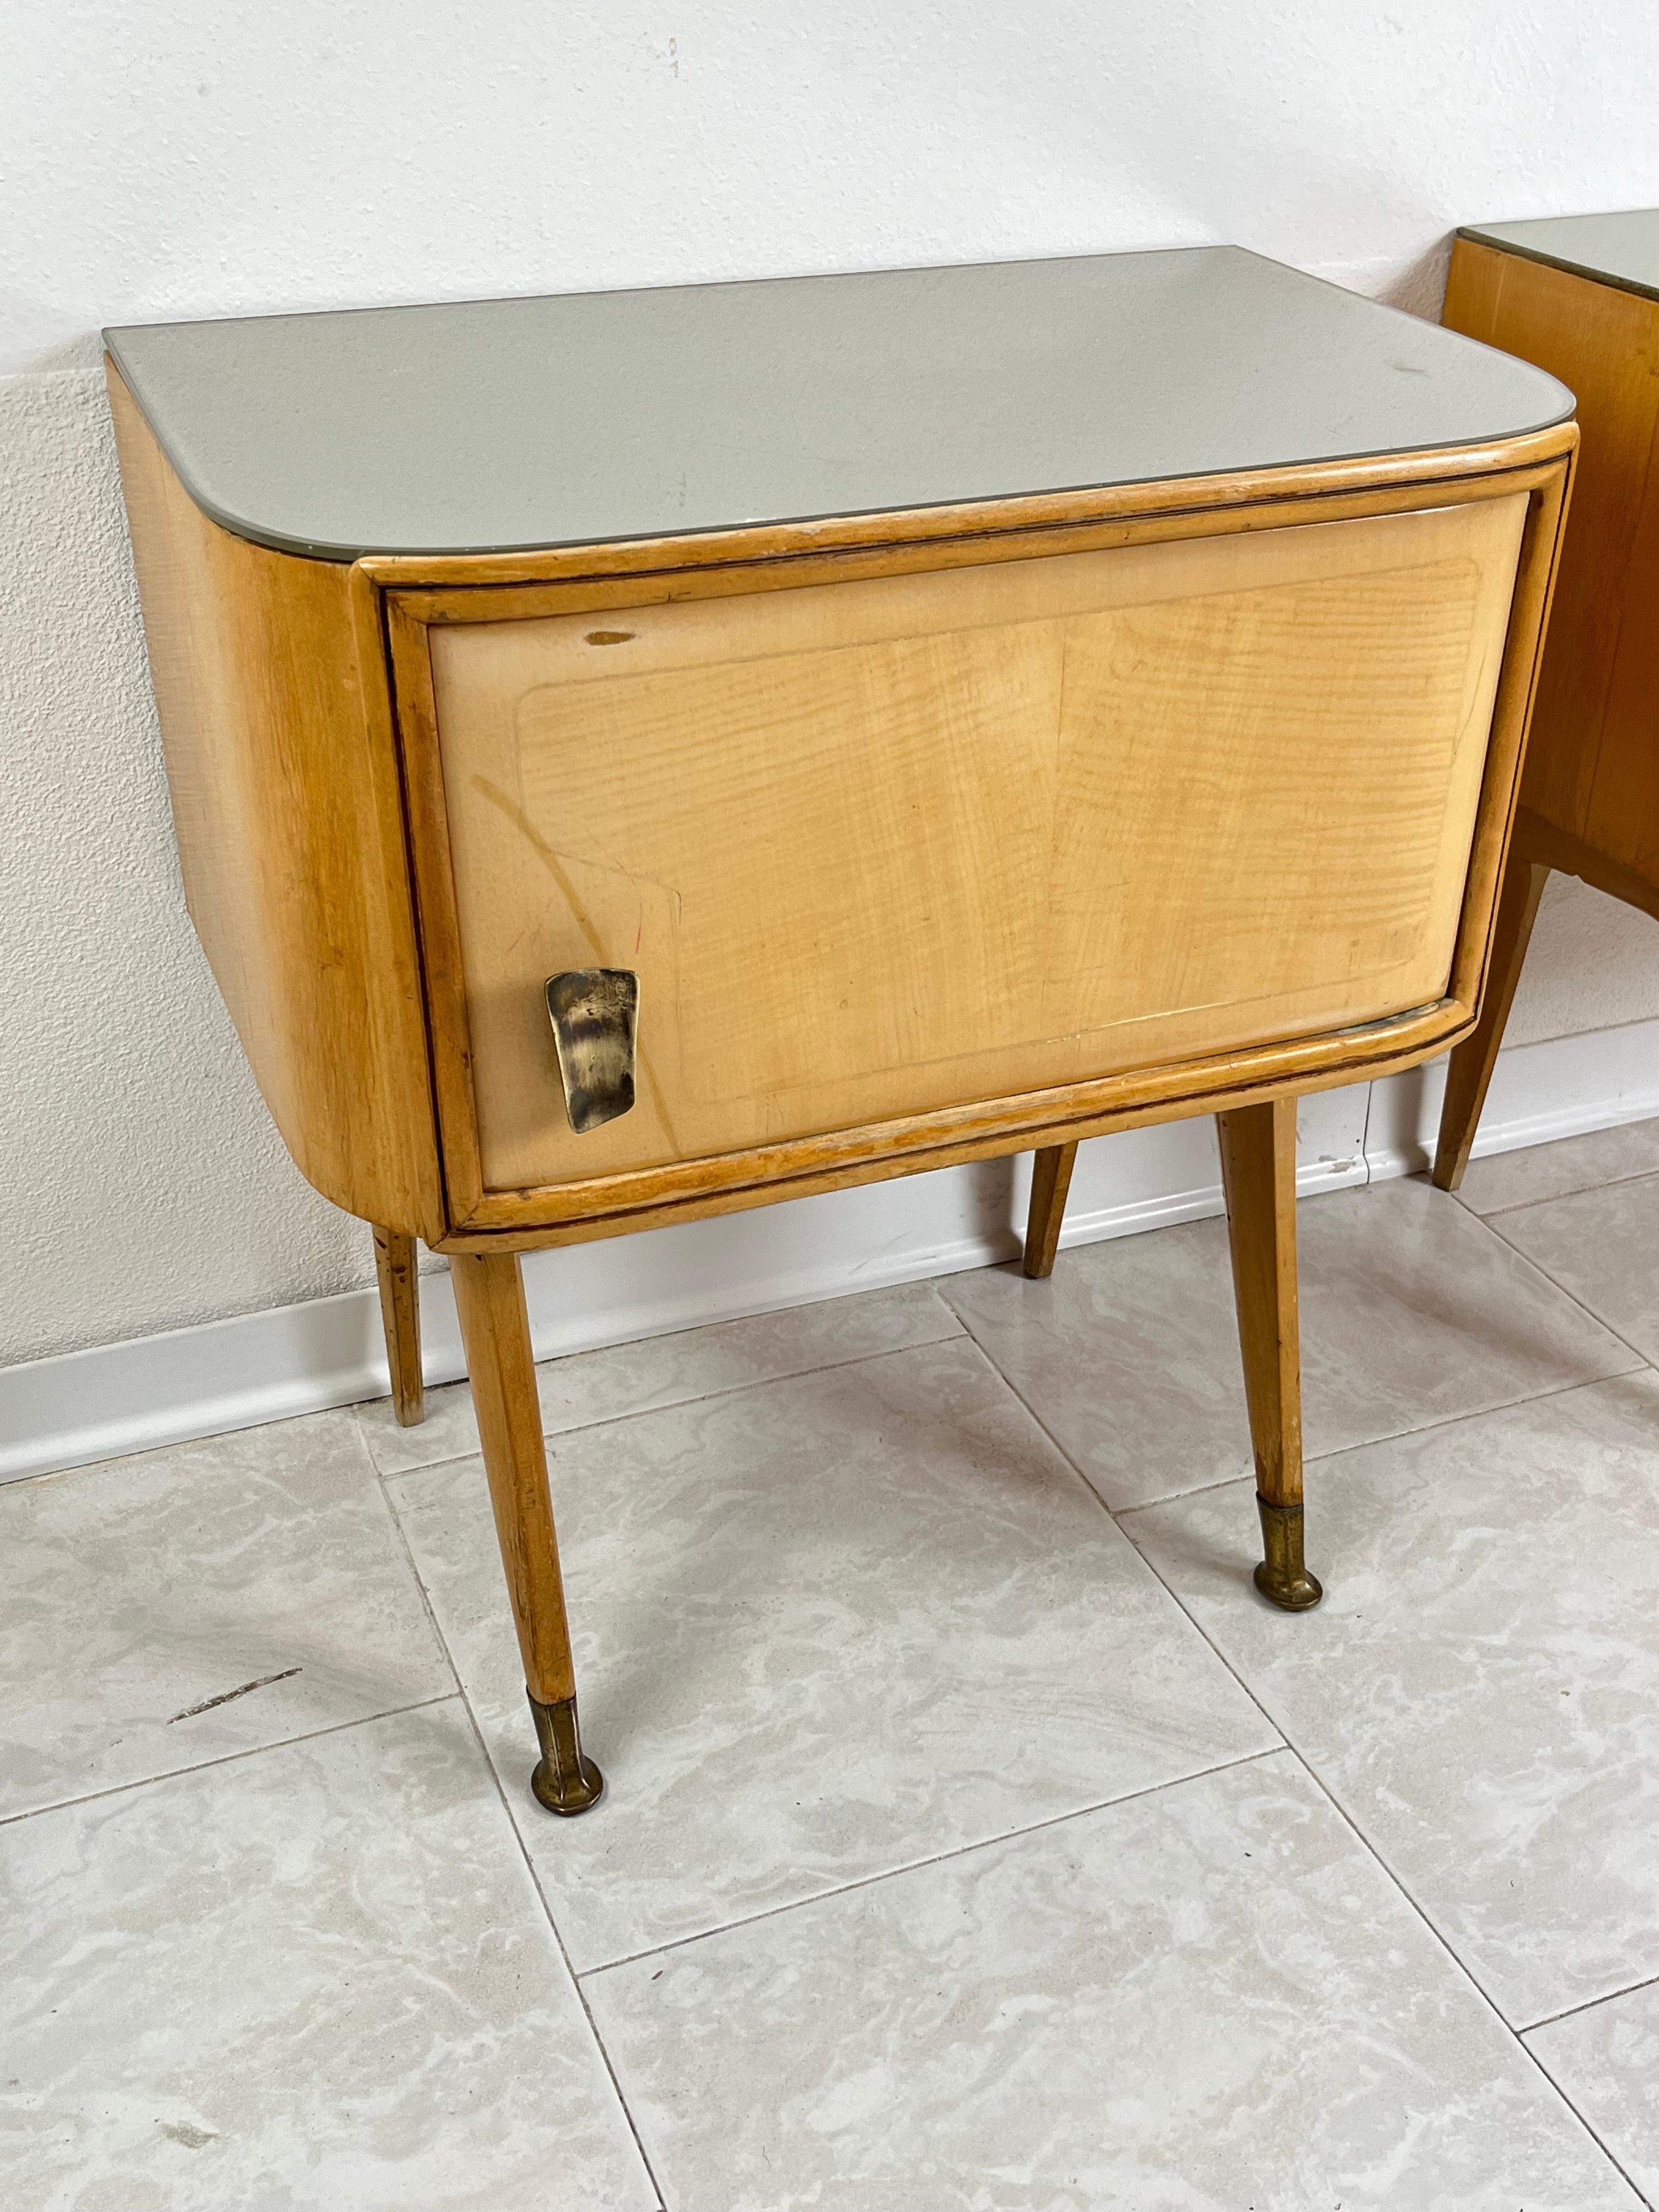 Set of 2 Mid-Century bedside tables attributed to Vittorio Dassi, 1959.
Made by the G. Cecchini furniture factory, as can be read from the stamps which also attest to the production date (3 March 1959).
Water green glass top.
Brass